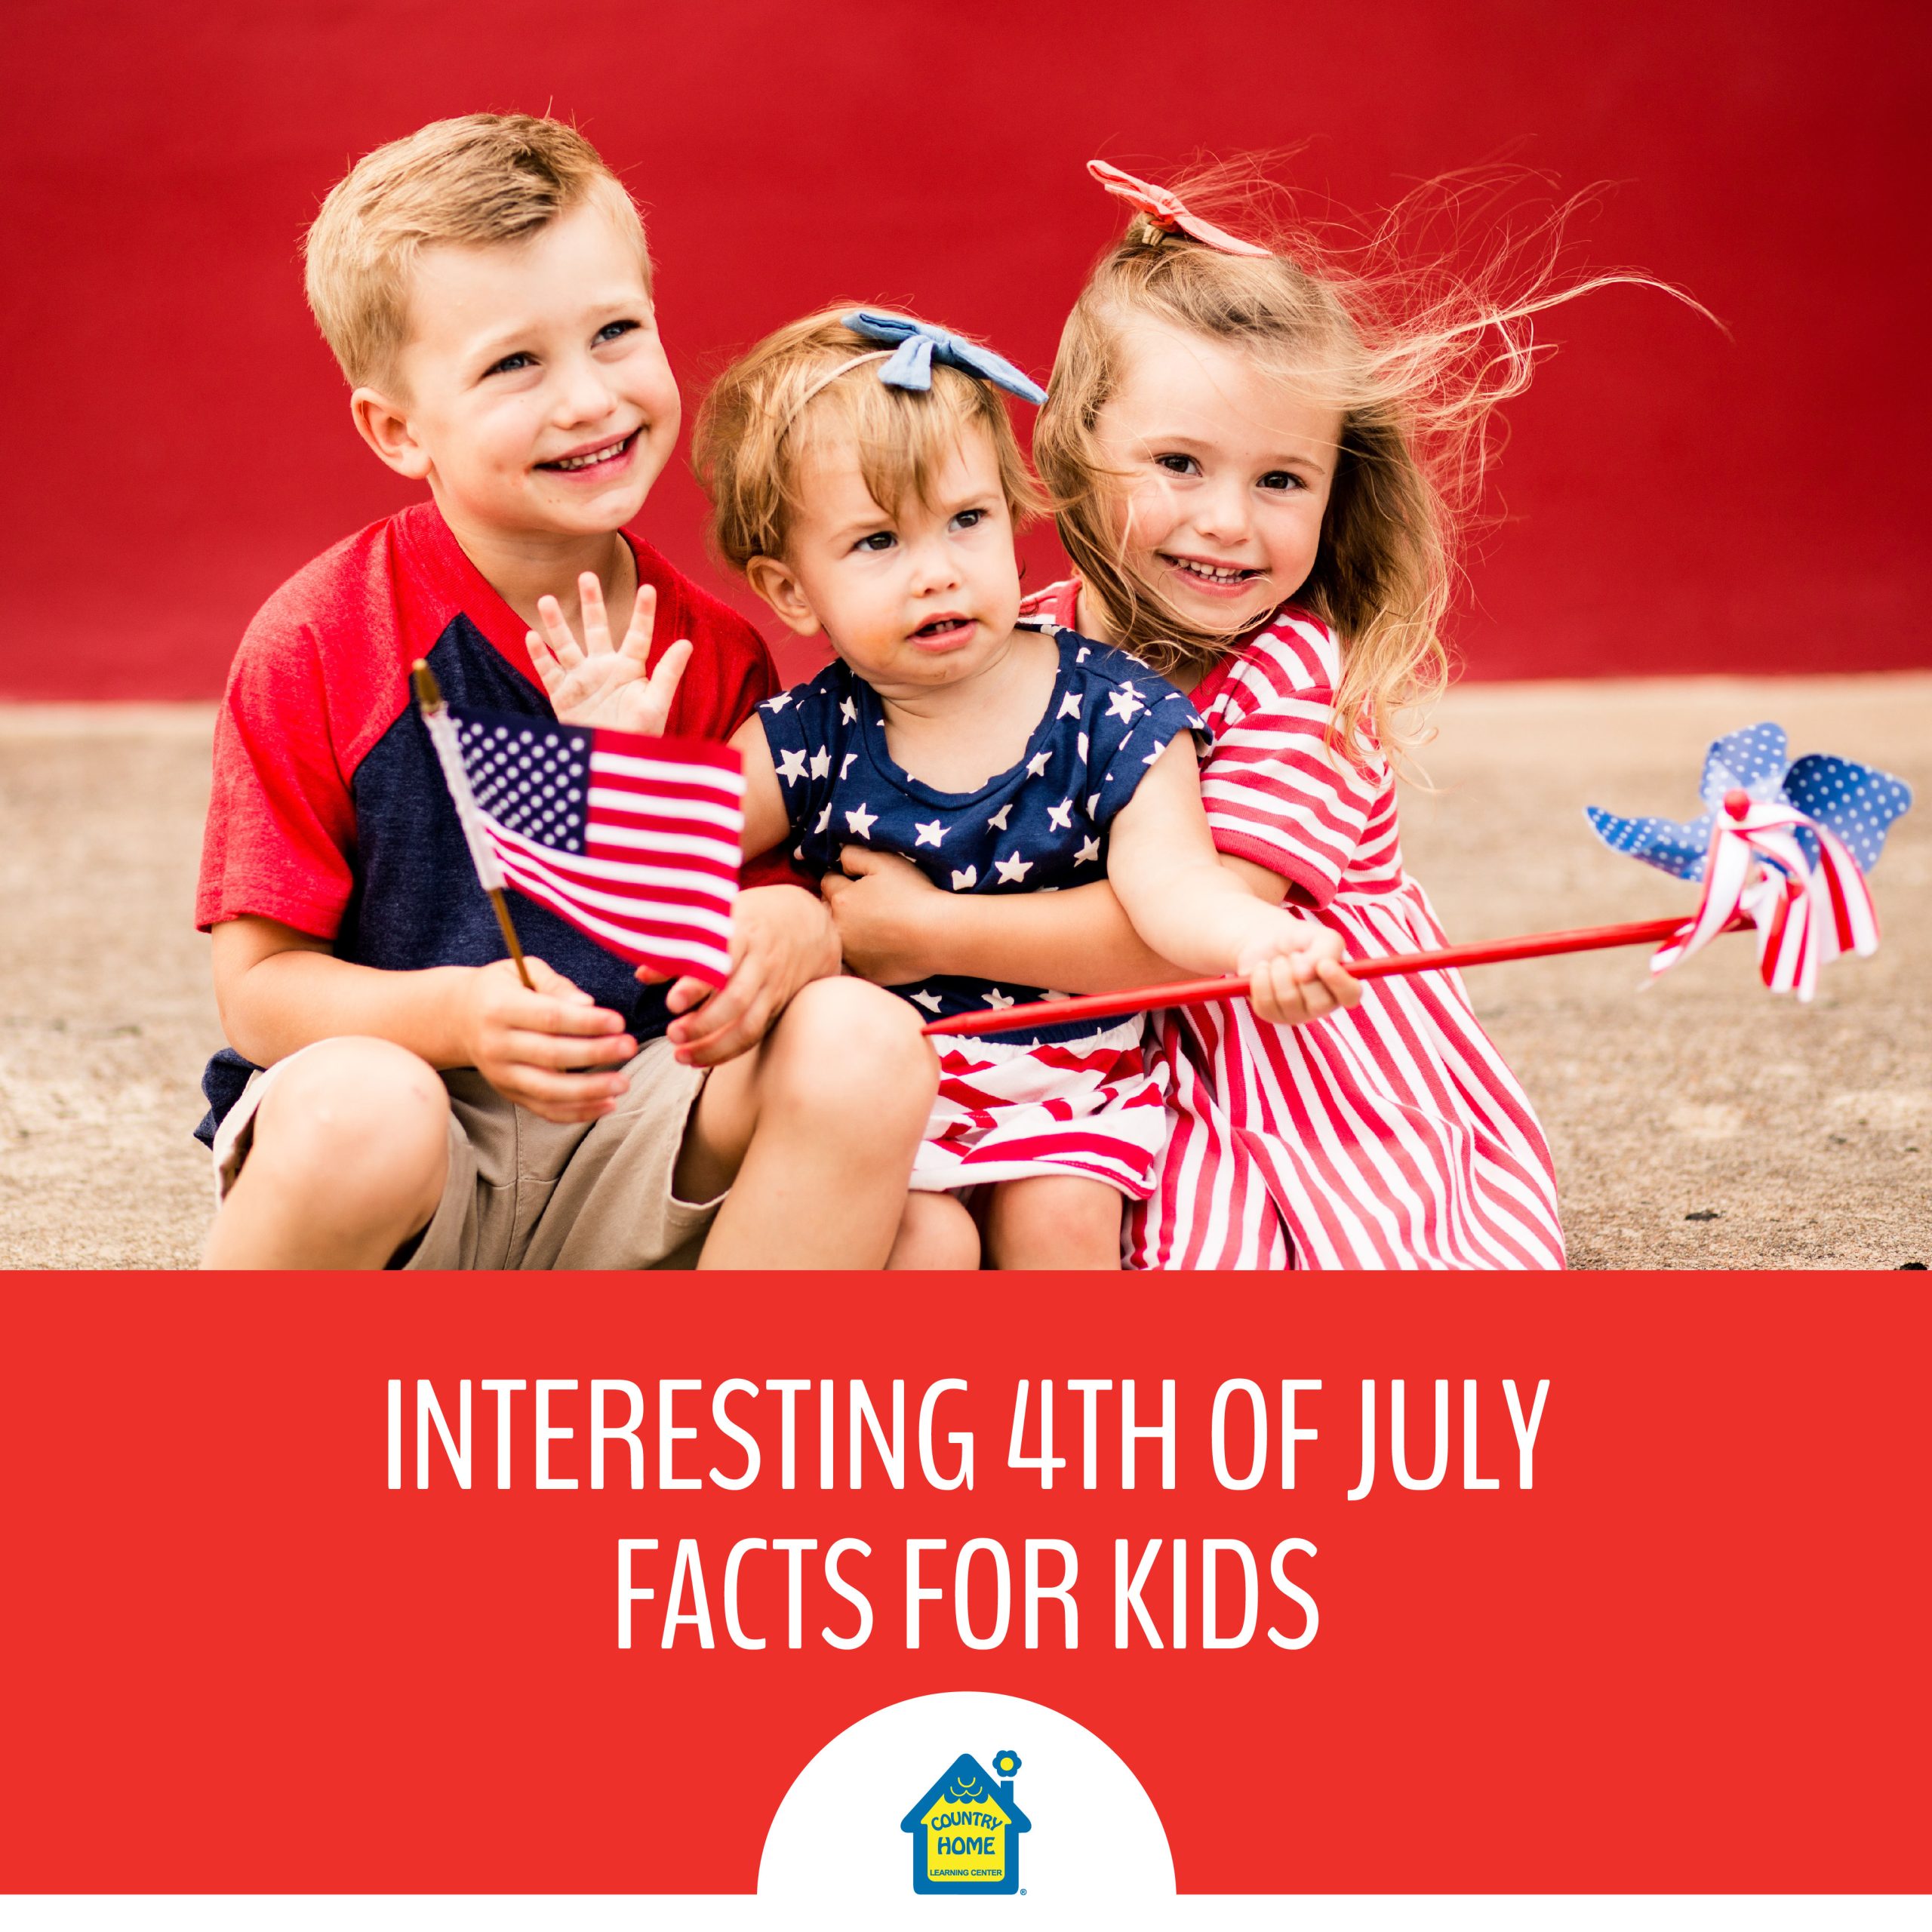 4th of July Facts for Kids